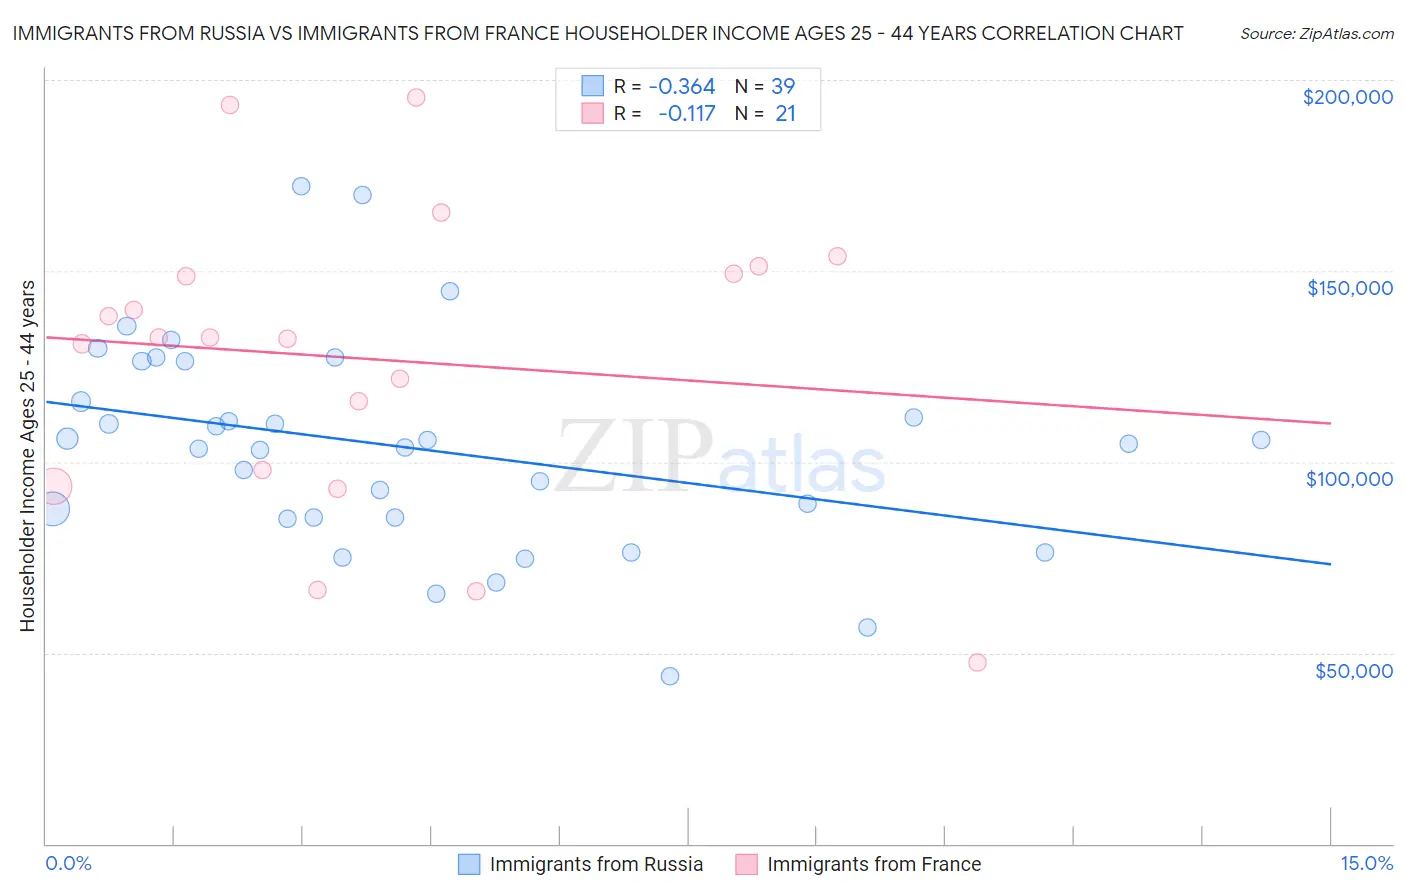 Immigrants from Russia vs Immigrants from France Householder Income Ages 25 - 44 years